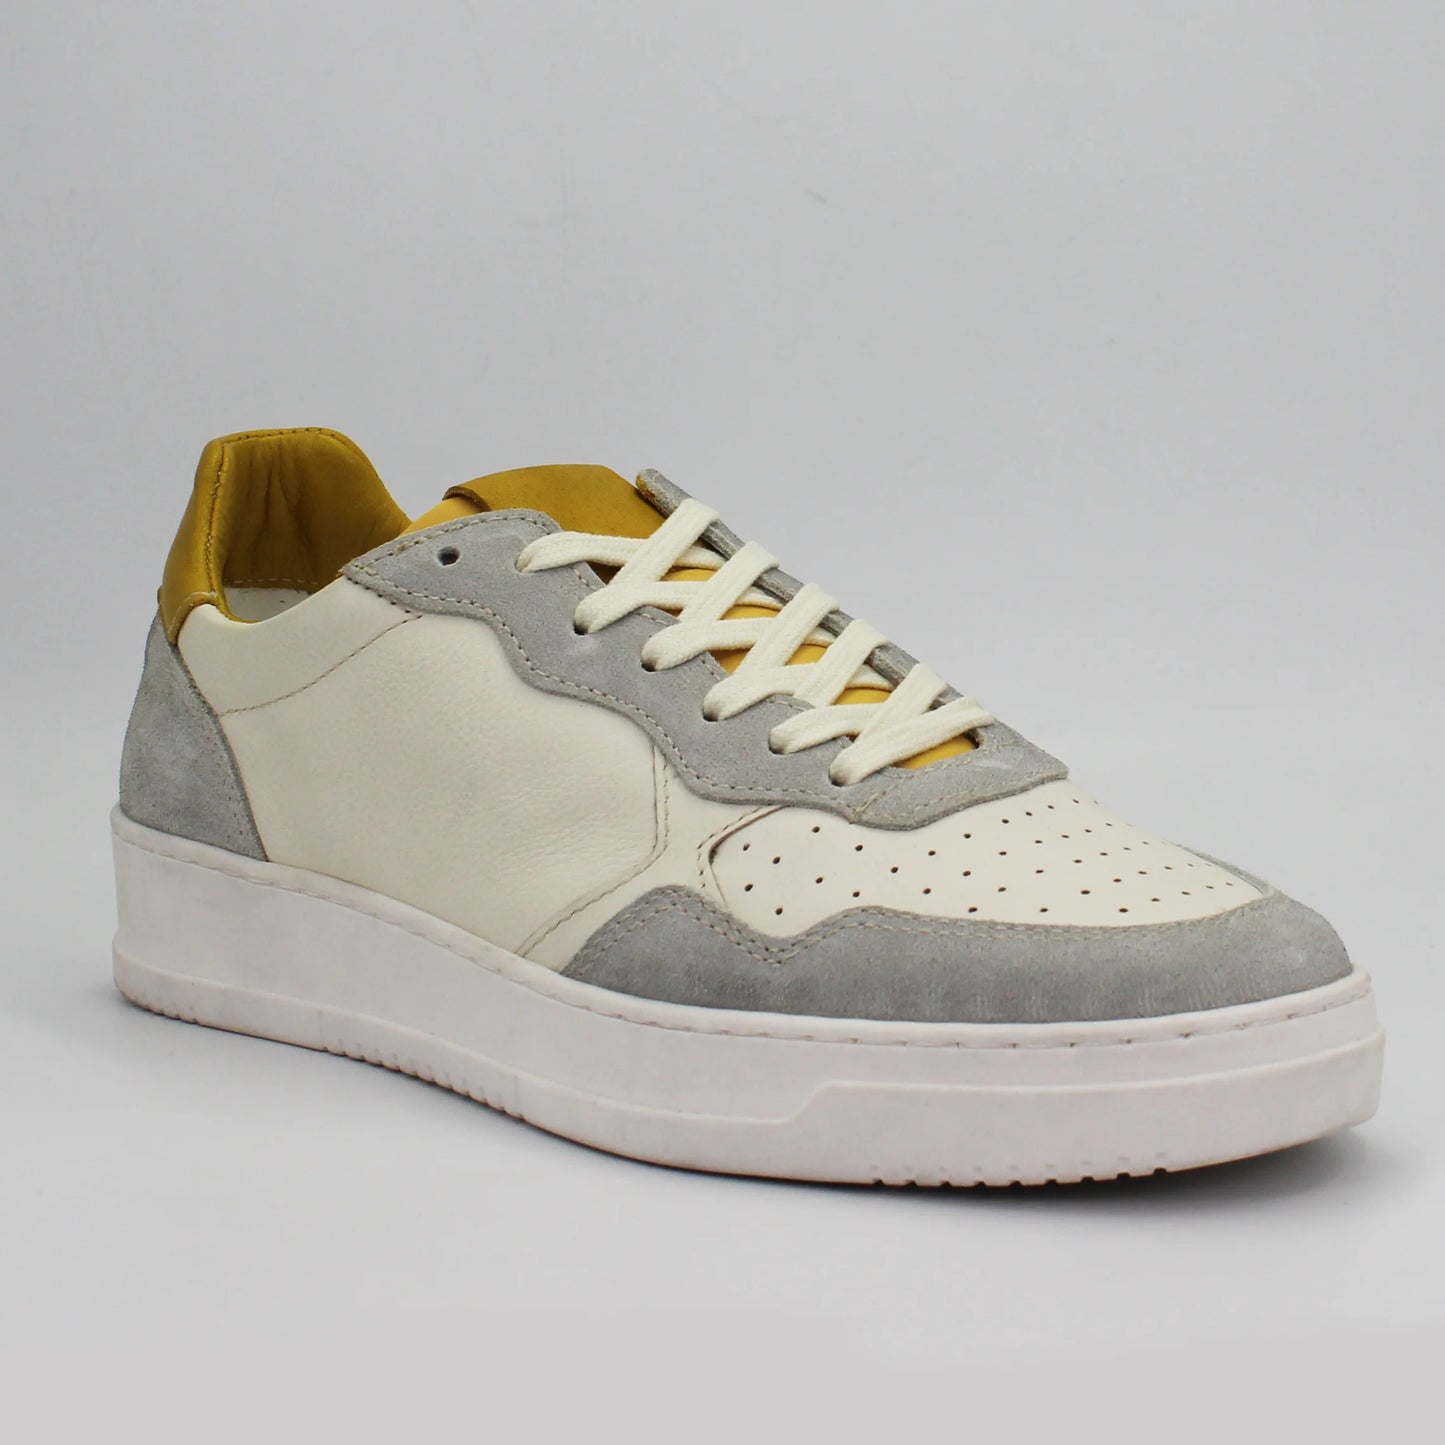 Shop Handmade Italian Leather Sneaker in Cam Ice (07Force) or browse our range of hand-made Italian shoes for men in leather or suede in-store at Aliverti Cape Town, or shop online. We deliver in South Africa & offer multiple payment plans as well as accept multiple safe & secure payment methods.